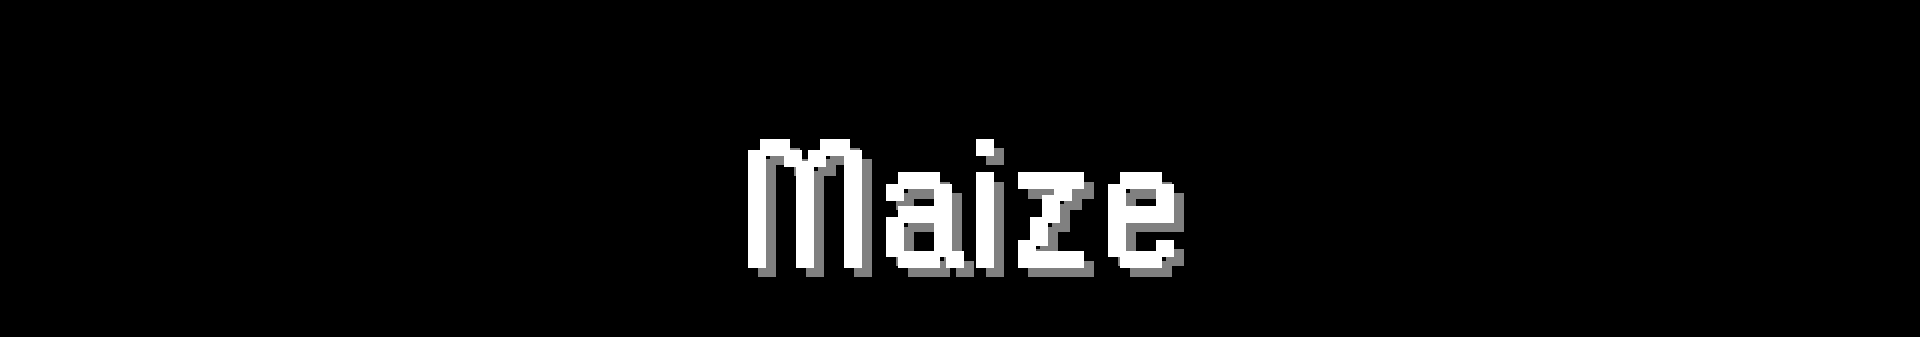 Maize: Demo - Release 1.0.0 Coming Soon!